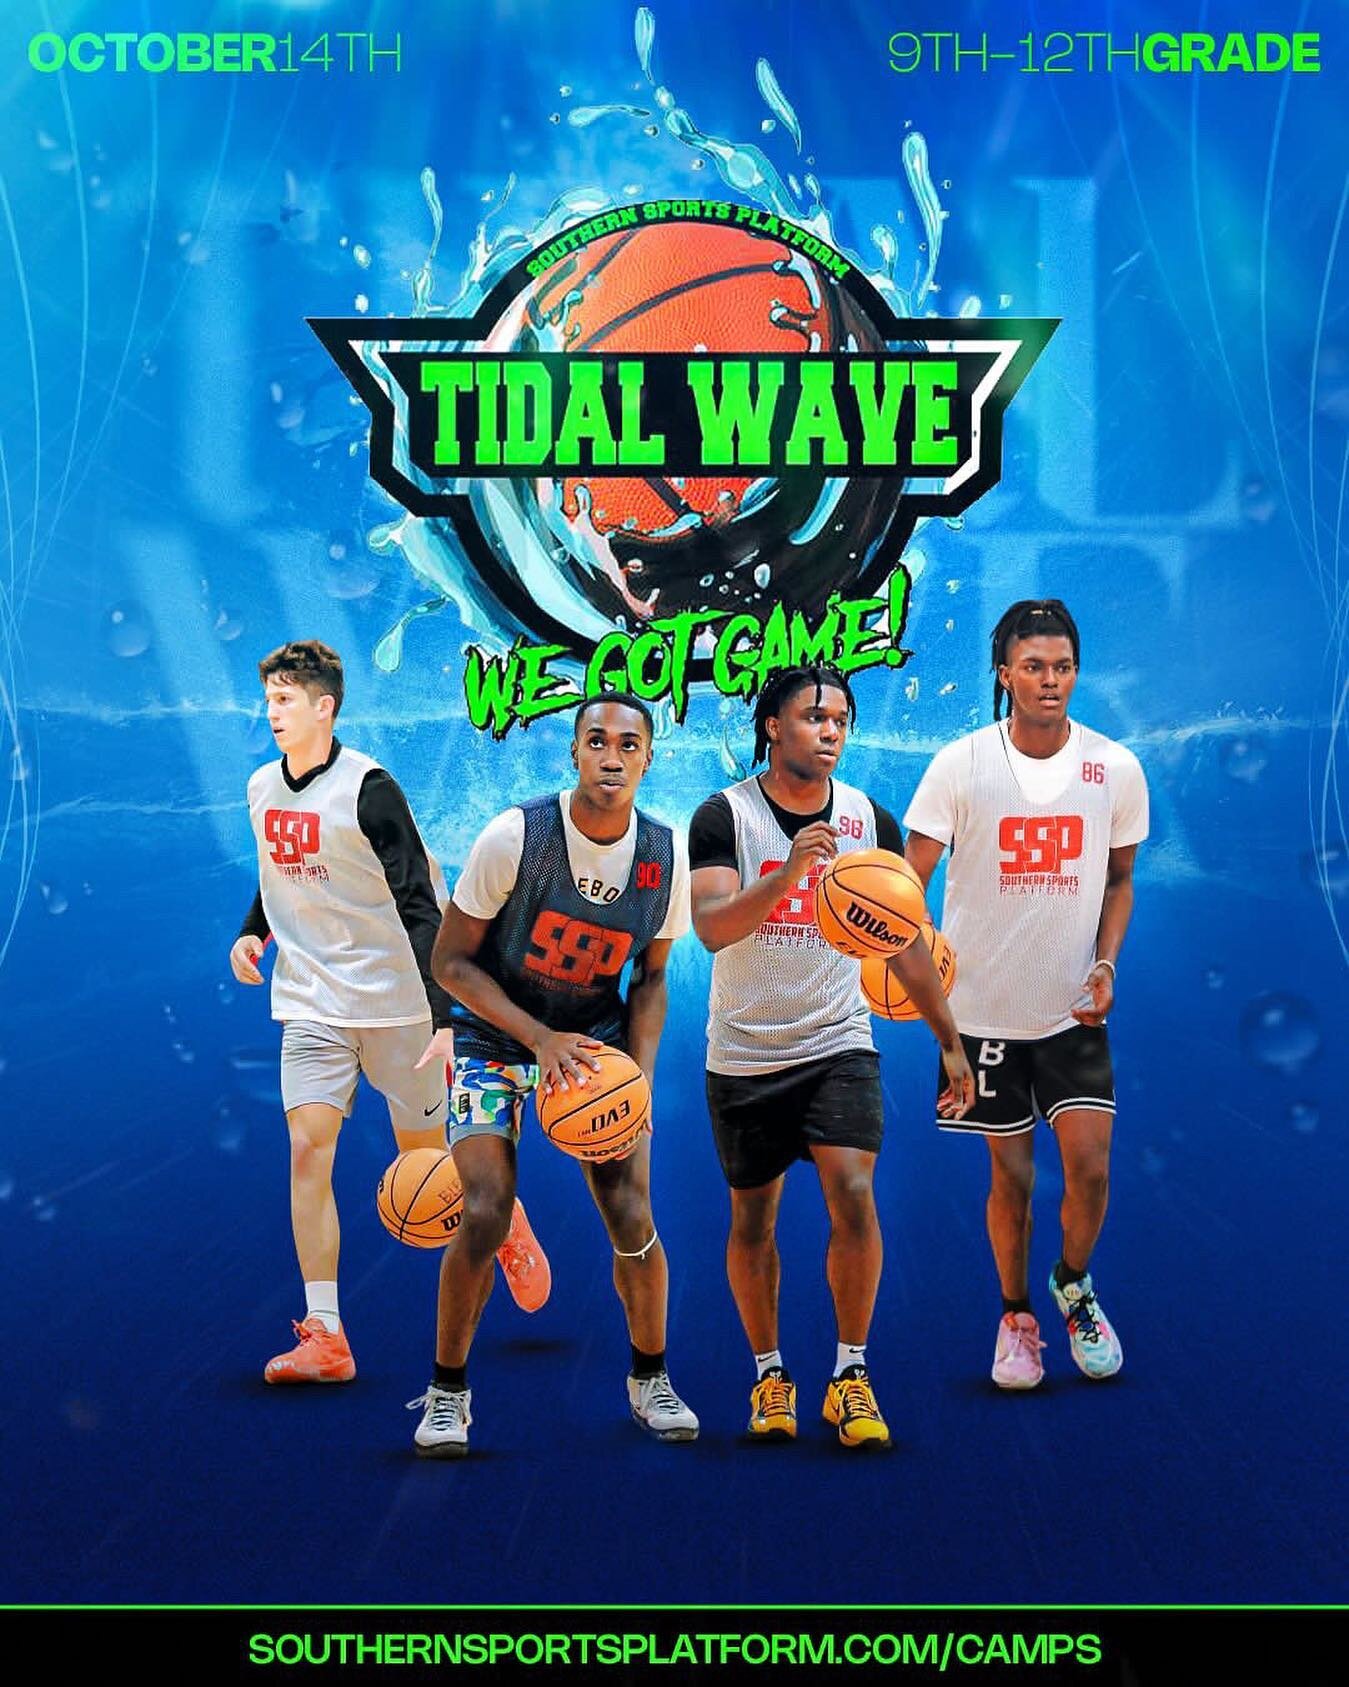 SSP Tidal Wave Exposure Camp🌊 Where the BEST come to Showcase their talent! 

The PERFECT Fall Camp Finale‼️ BE THERE

🗓 October 14th, 2023 

📍Columbus High School (Columbus, MS)
 
🟢Highlights/ Write-ups 
🟢Elite Competition 
🟢Maximum Exposure
?